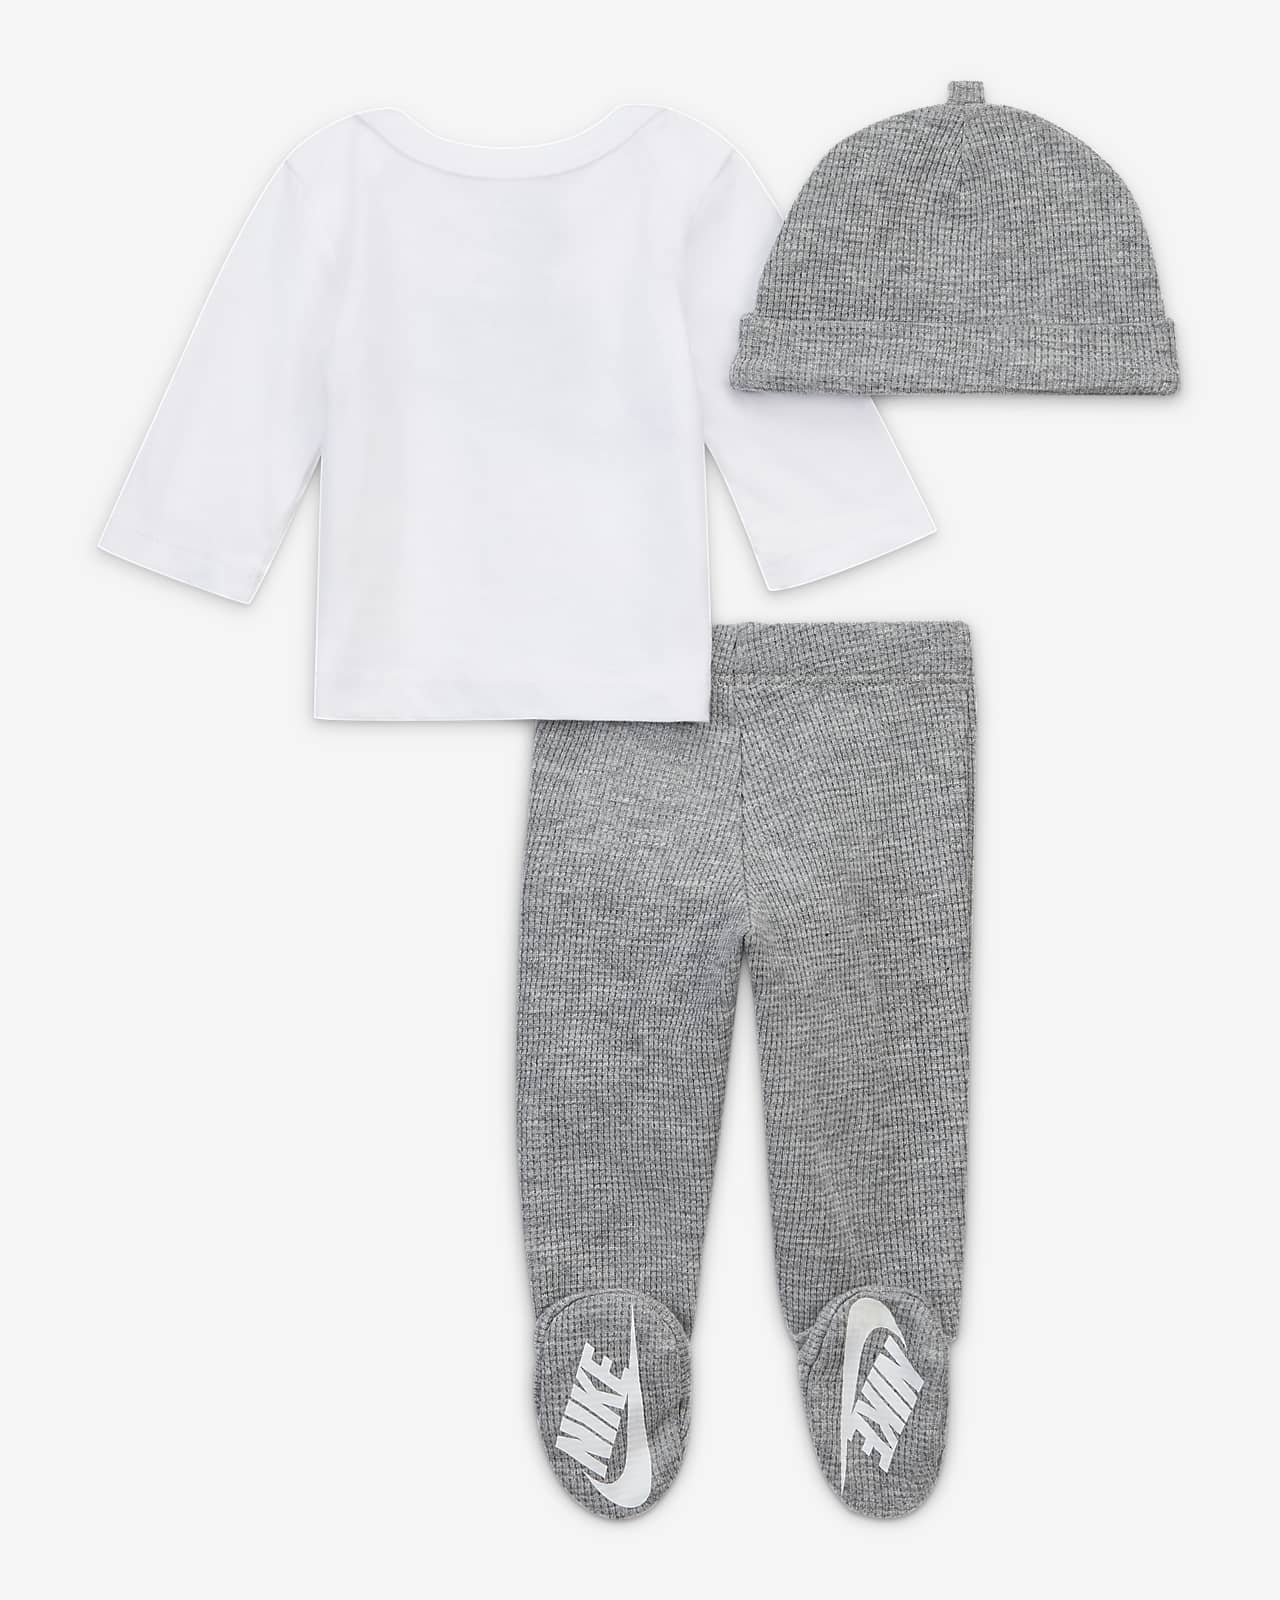 genetisch Vlucht Ophef Nike Baby (Preemie) T-Shirt, Footed Pants and Hat Set. Nike.com